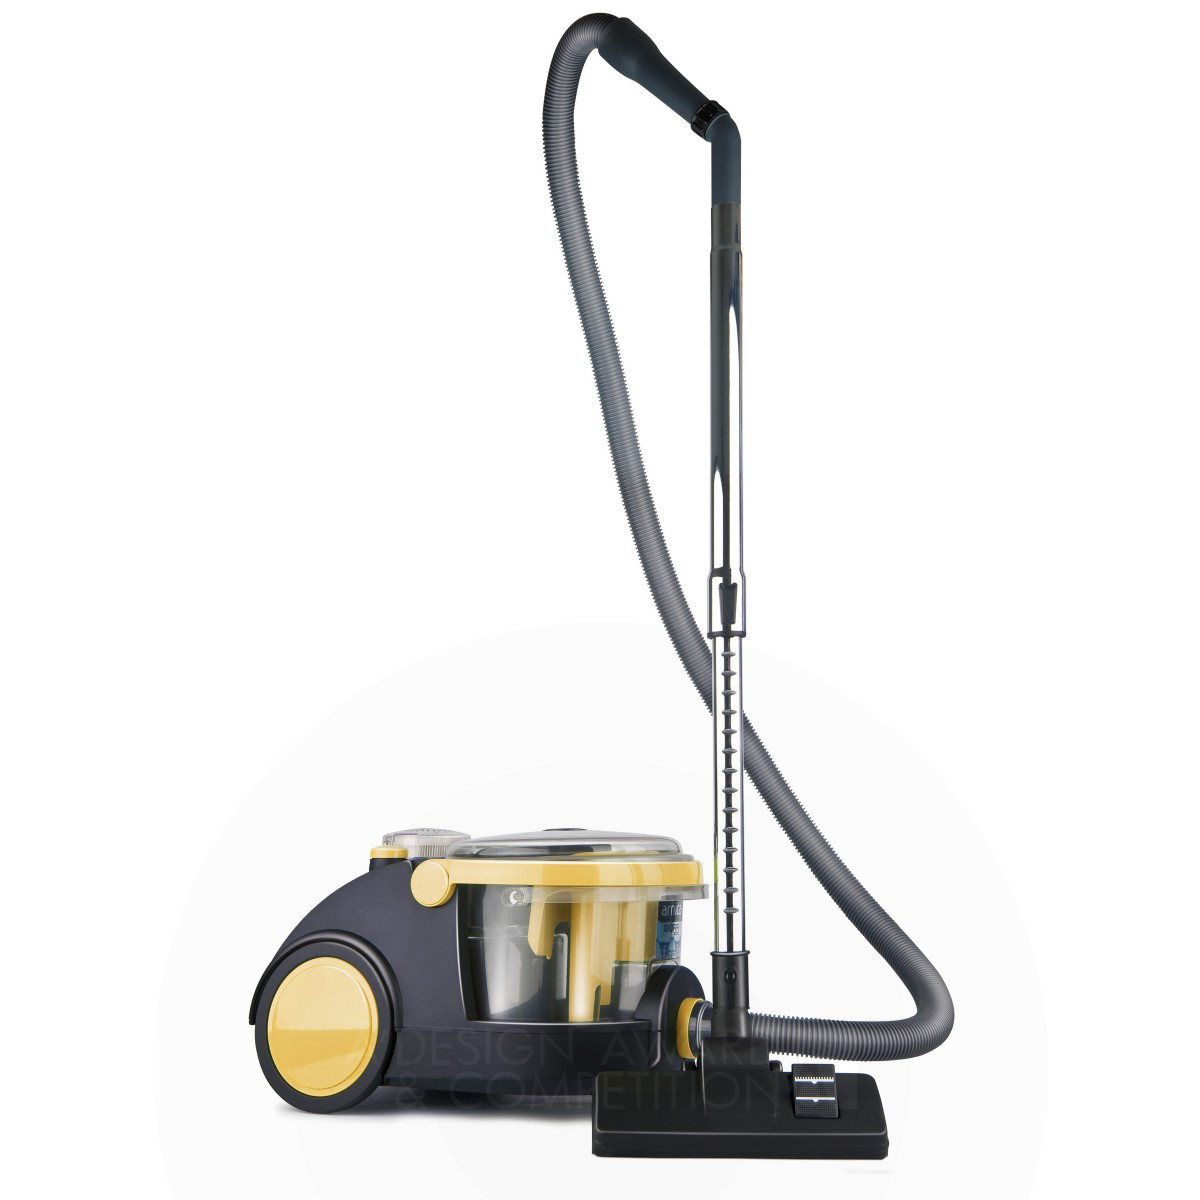 Arnica Bora Vacuum Cleaner With Water Filter by Yasemin Ulukan Golden Home Appliances Design Award Winner 2012 